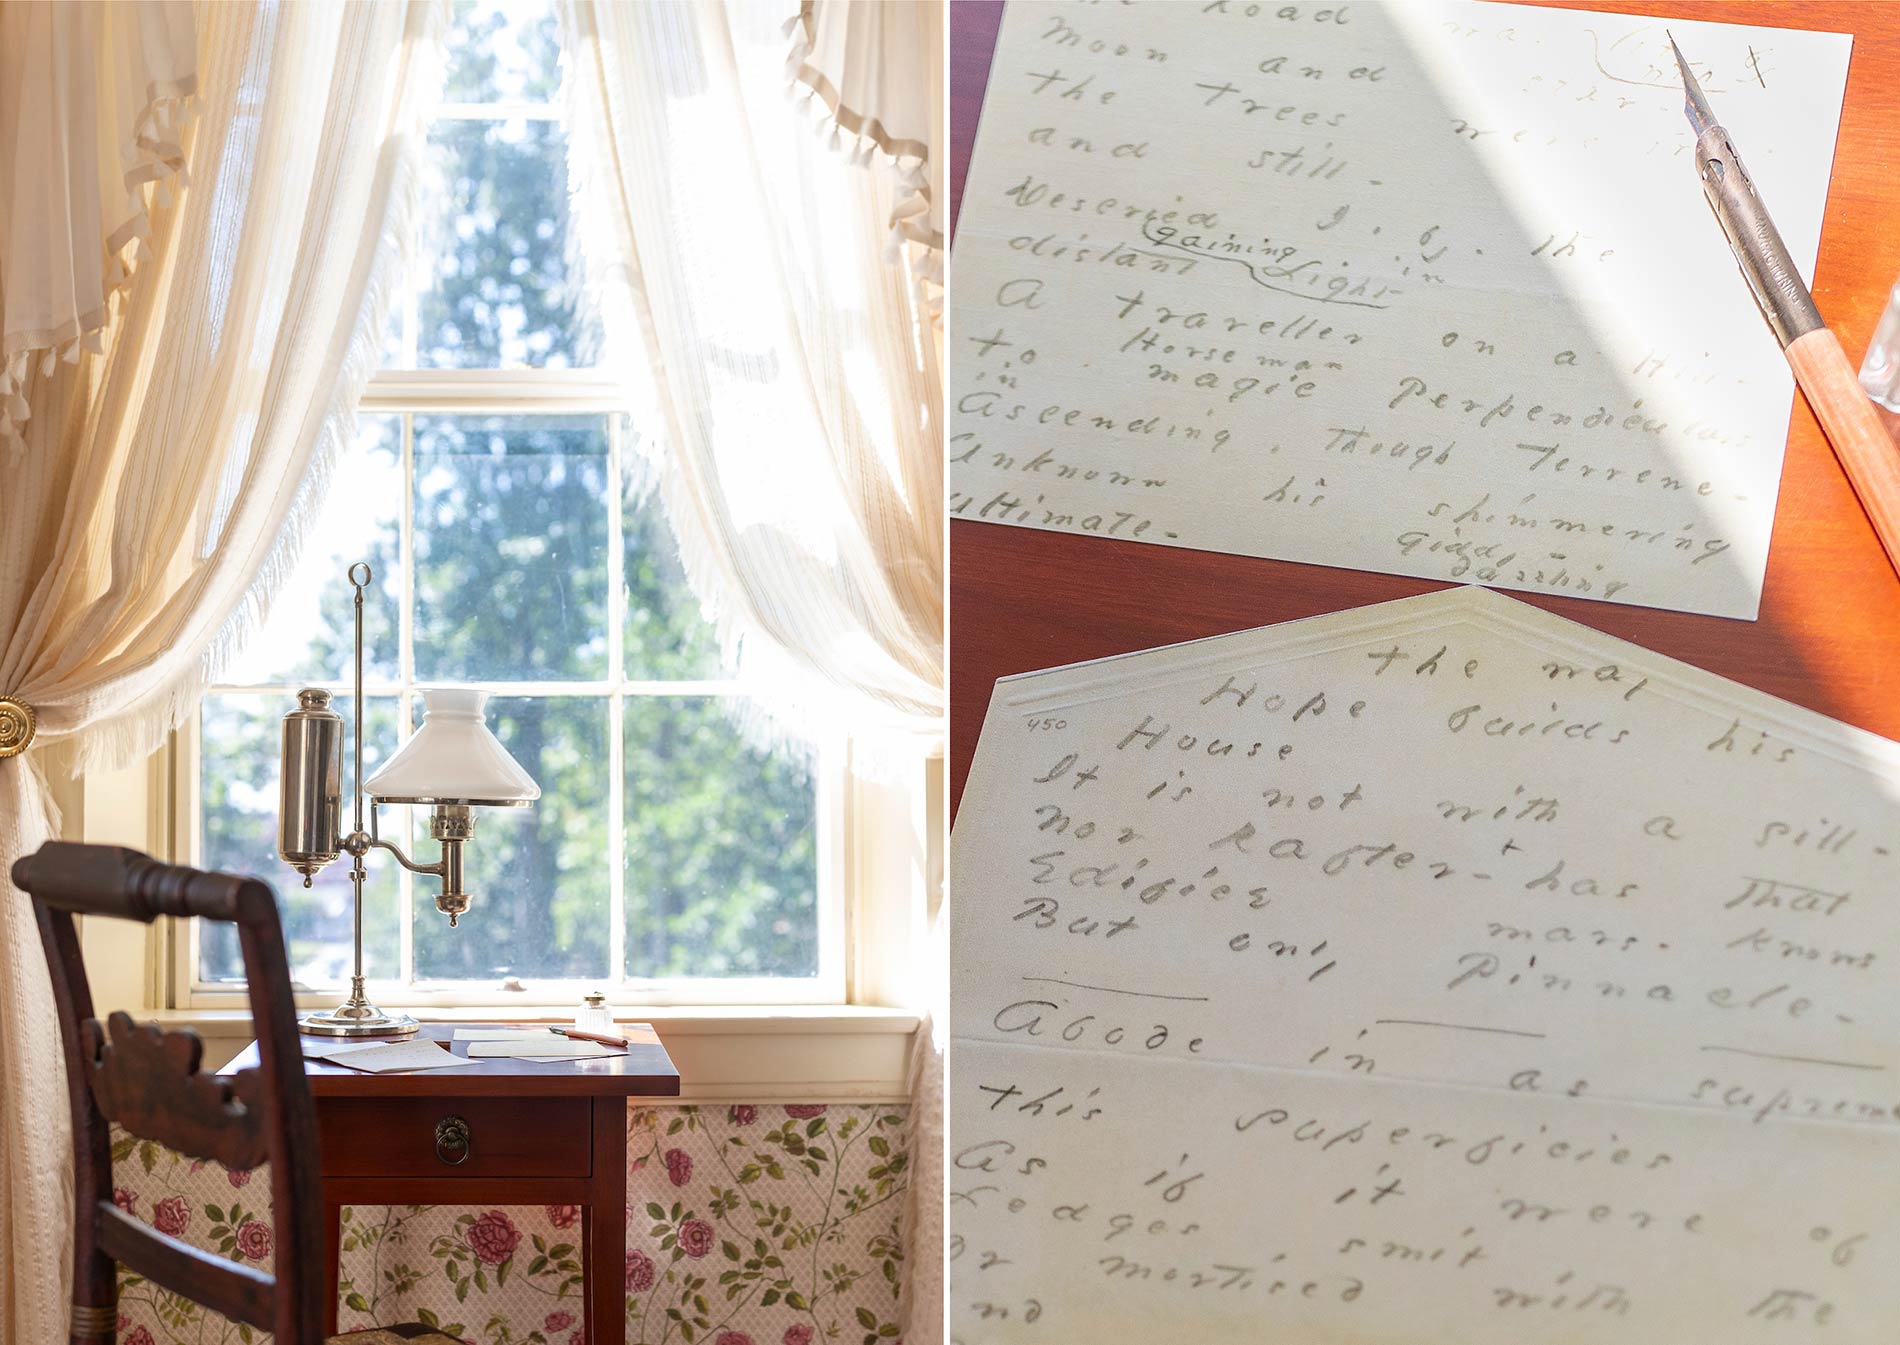 Poems by Emily Dickinson written on envelopes and Emily's writing desk.